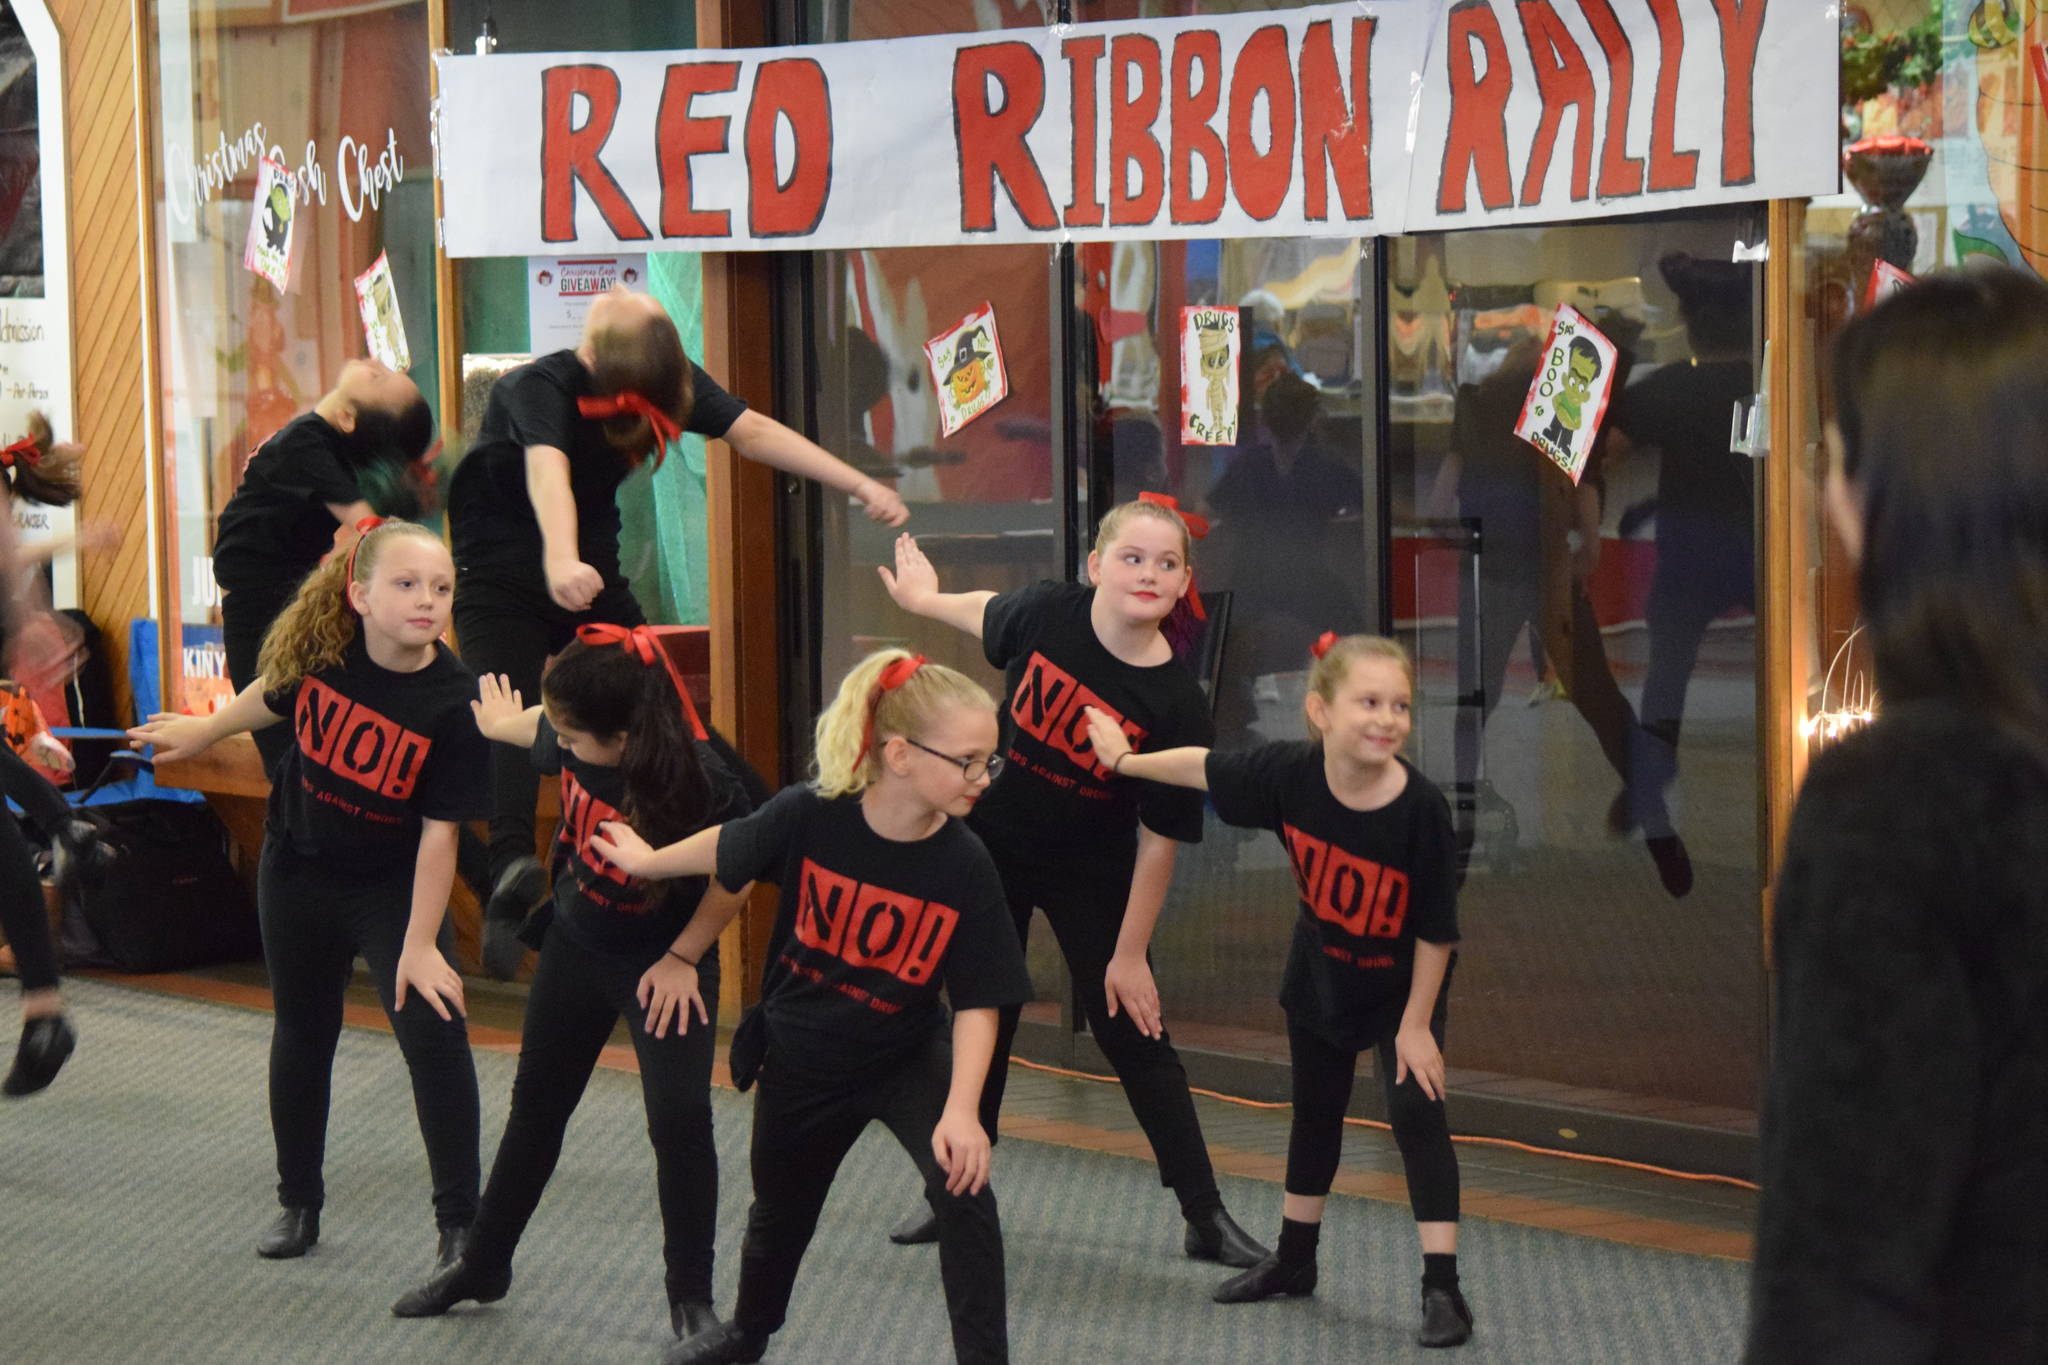 Fusion Dance Company dancers, ages 7-15, perform at the Red Ribbon Rally, an annual anti-drug event at the Nugget Mall. (Kevin Gullufsen | Juneau Empire)